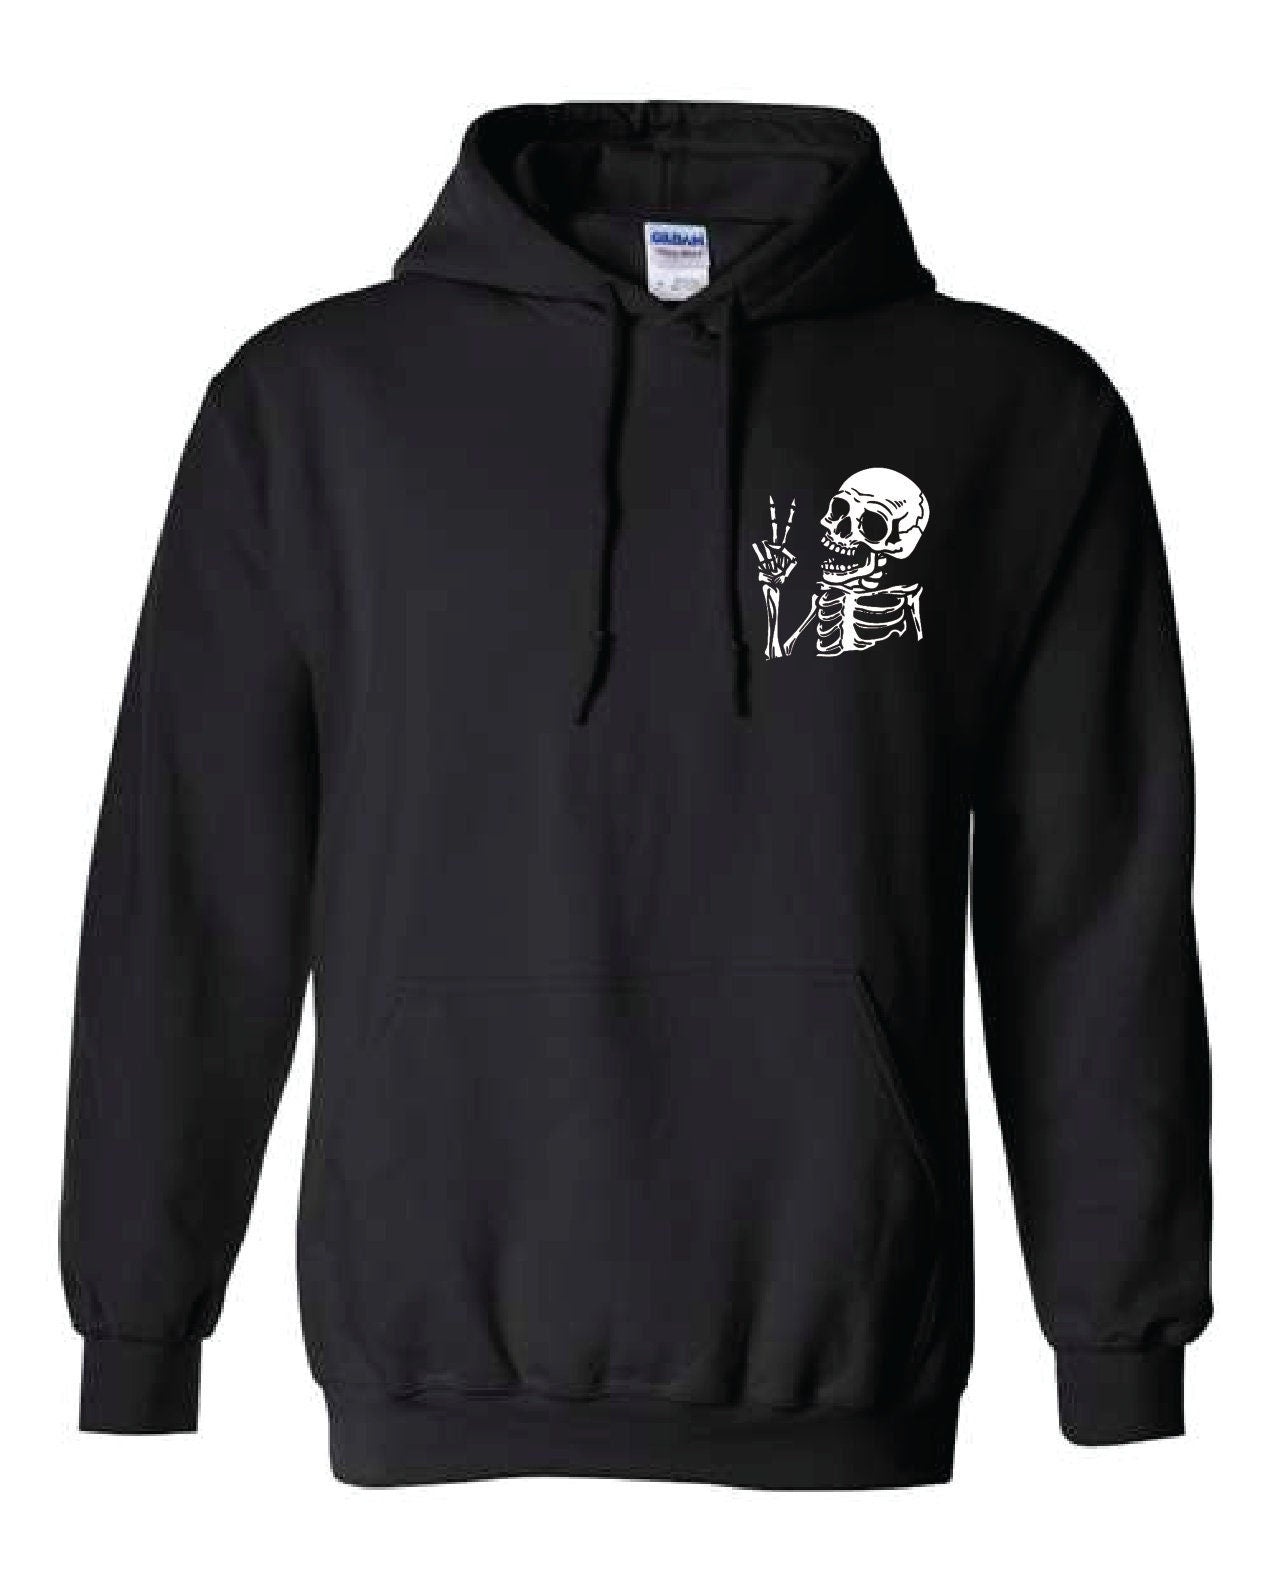 Have The Day You Deserve Hoodie, Kindness Gift, Sarcastic Shirts,Motivational Skeleton Hoodie, Inspirational Clothes,Halloween hoodie